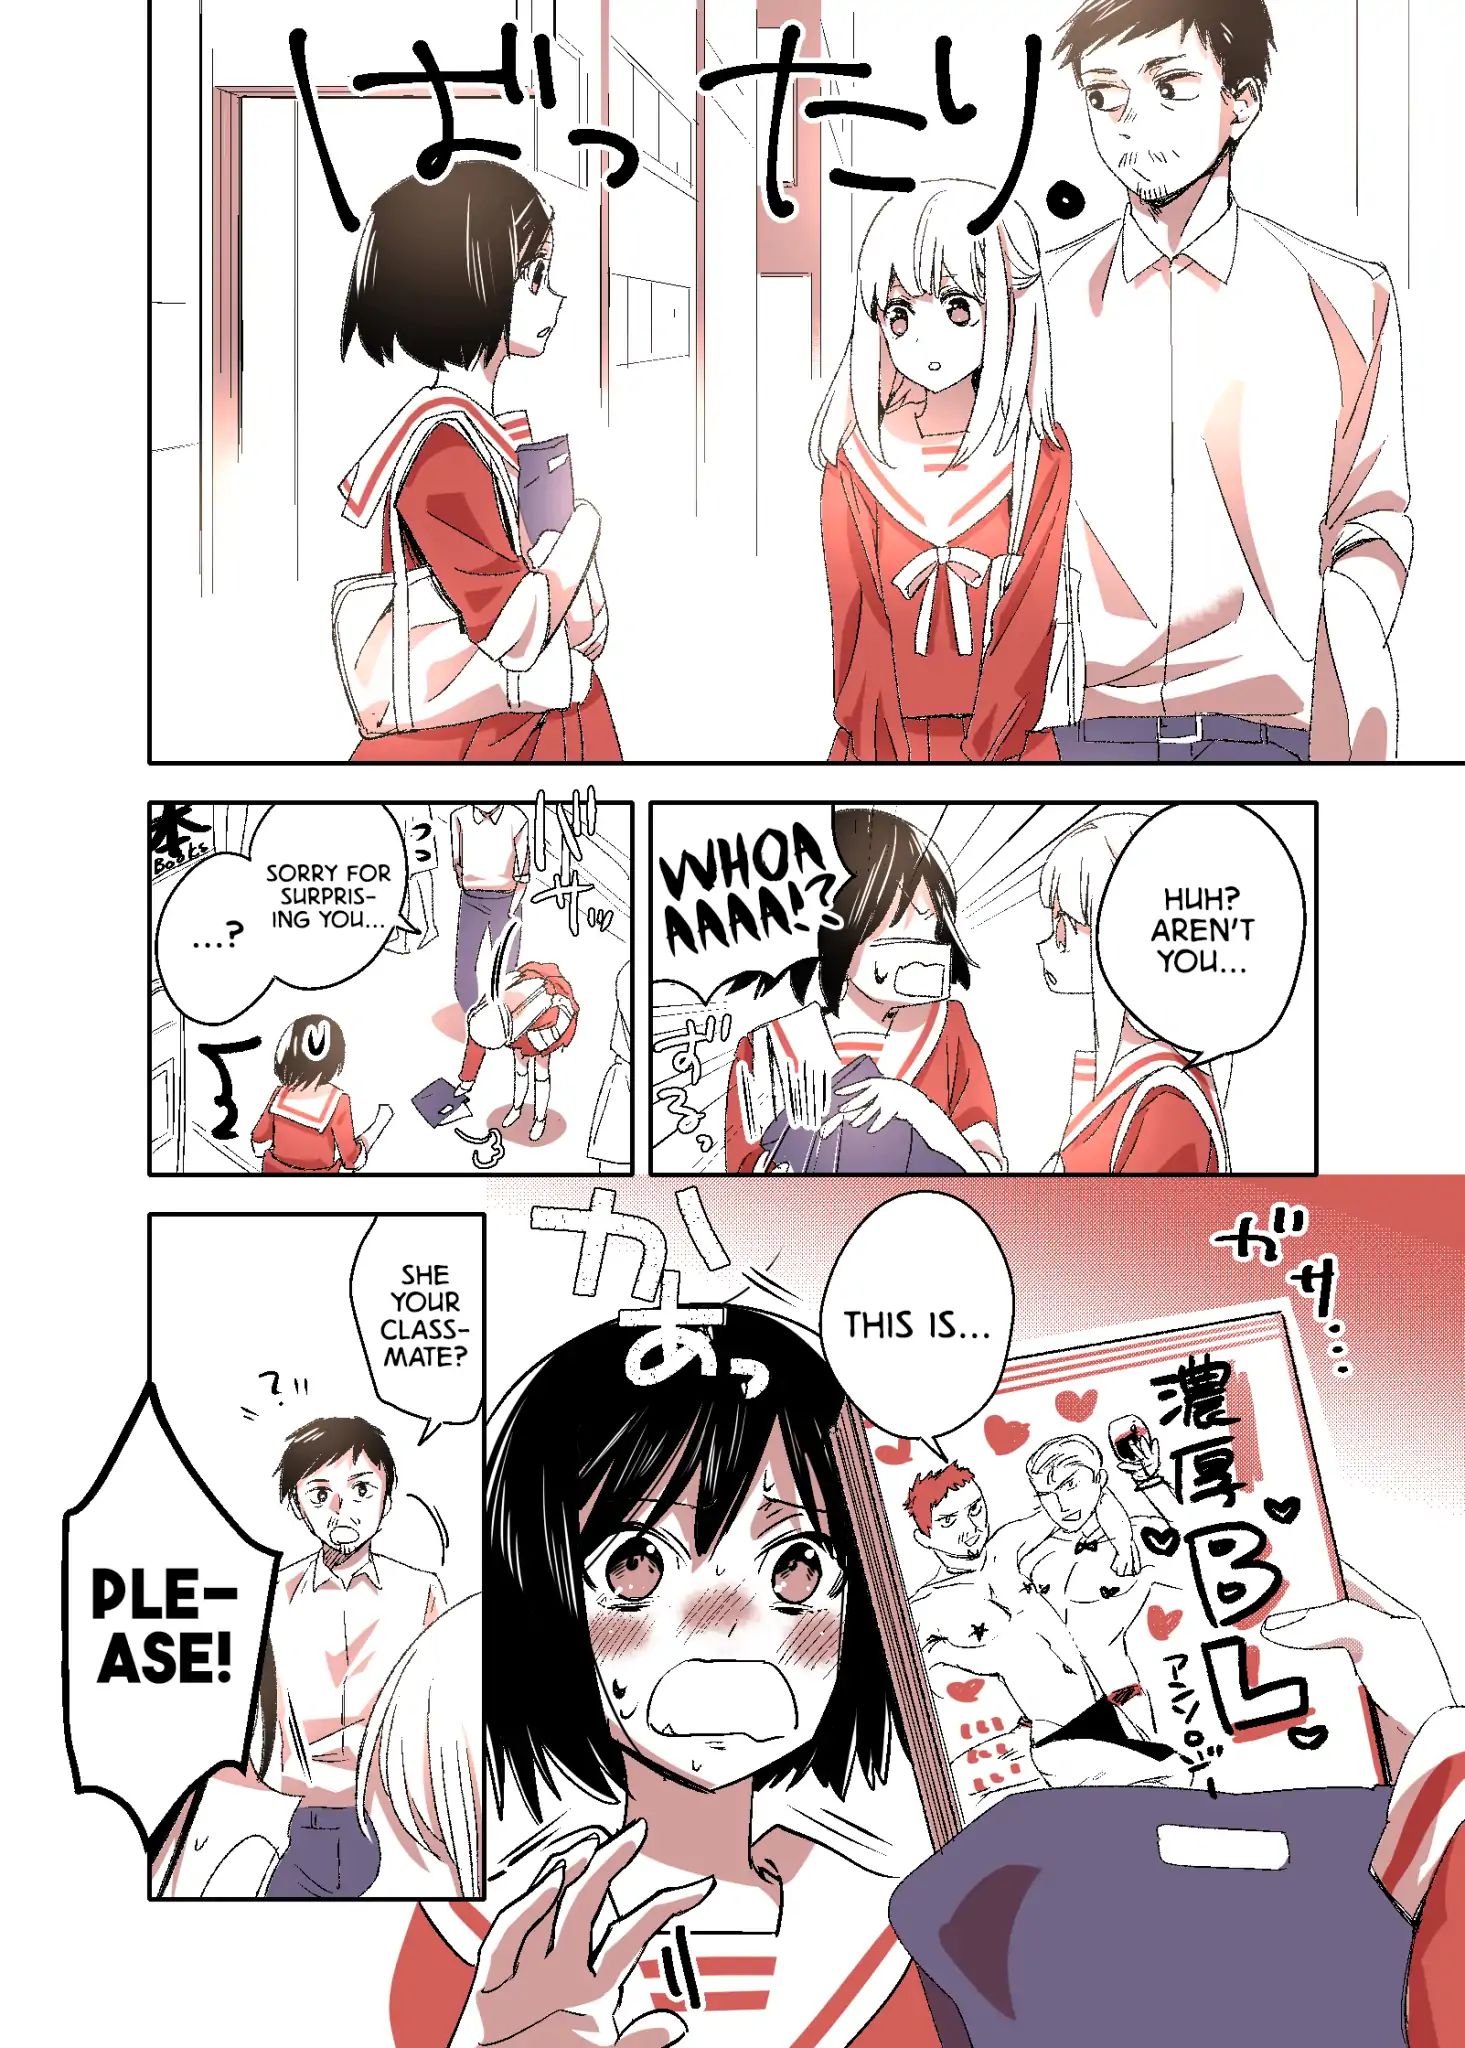 A Manga Where An Old Man Teaches Bad Things To A ●-School Girl Chapter 5.5 #2